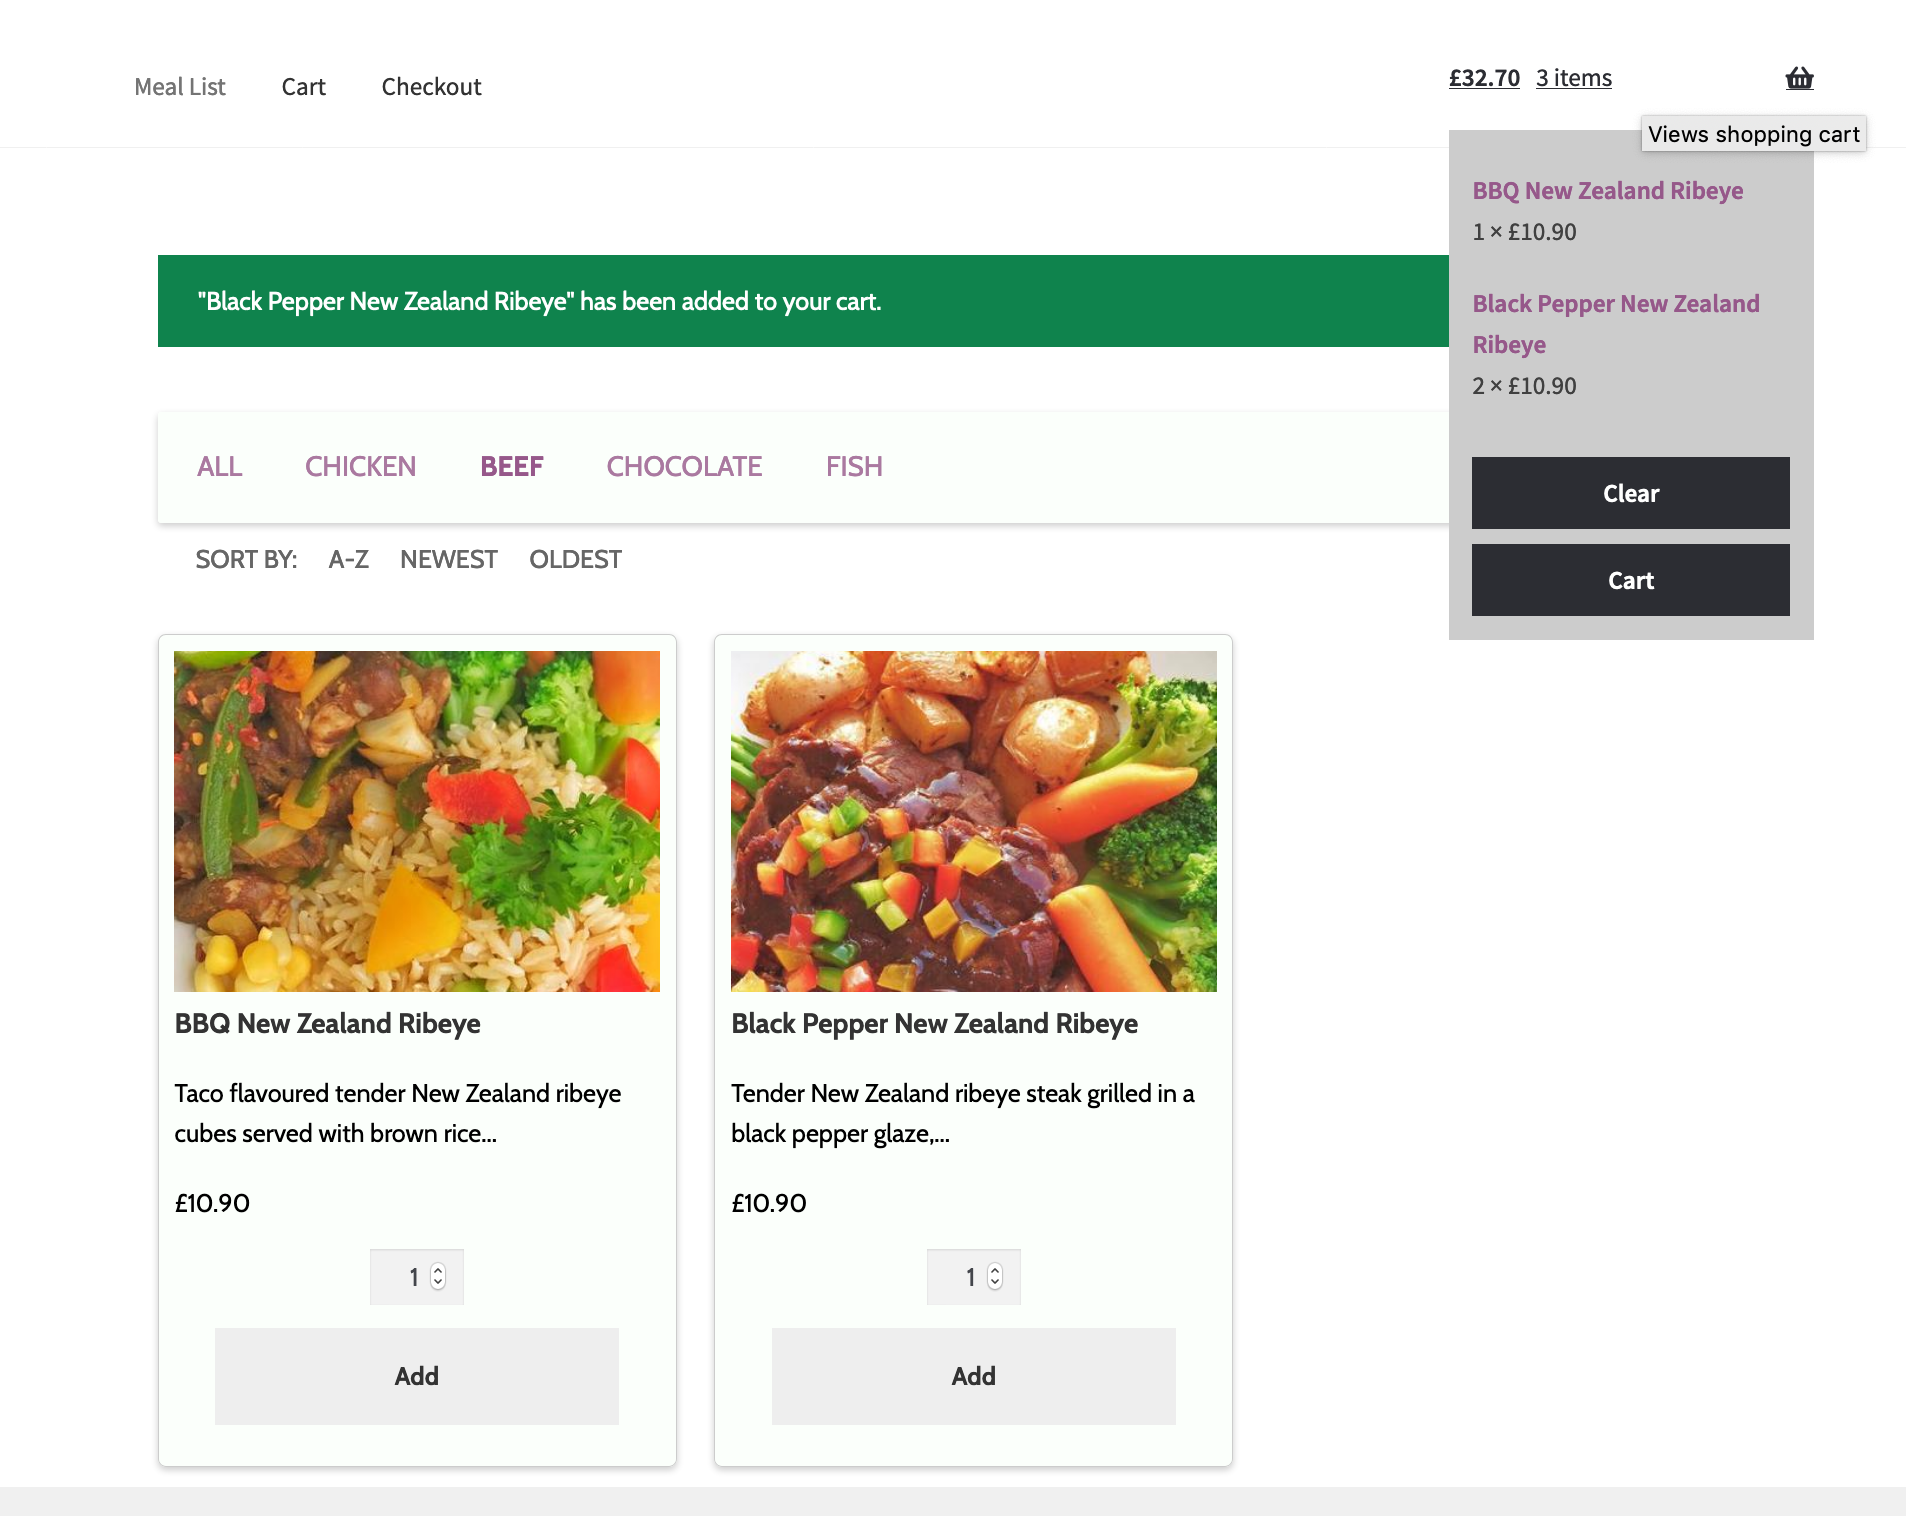 Allow users to pay for their meal prep order